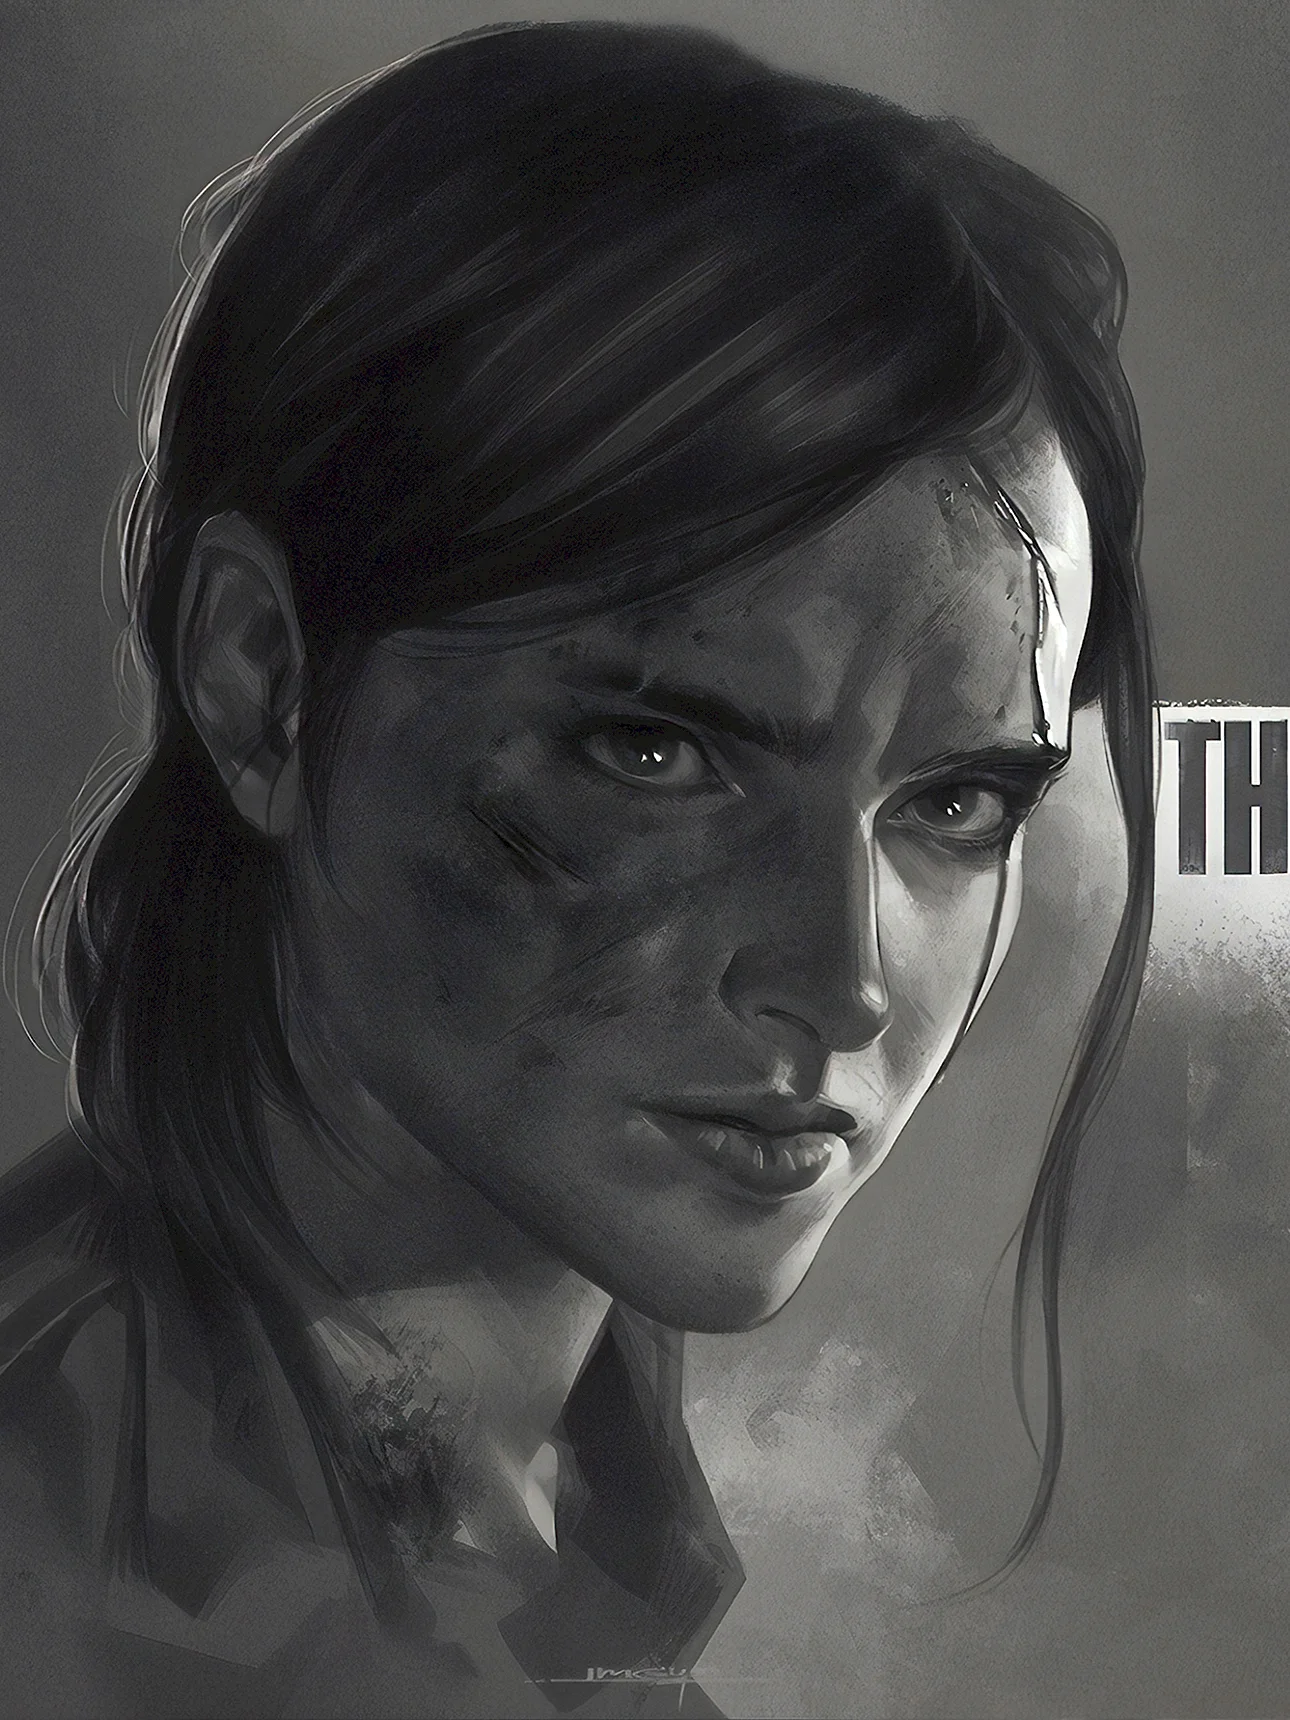 The Last Of Us Part Wallpaper For iPhone